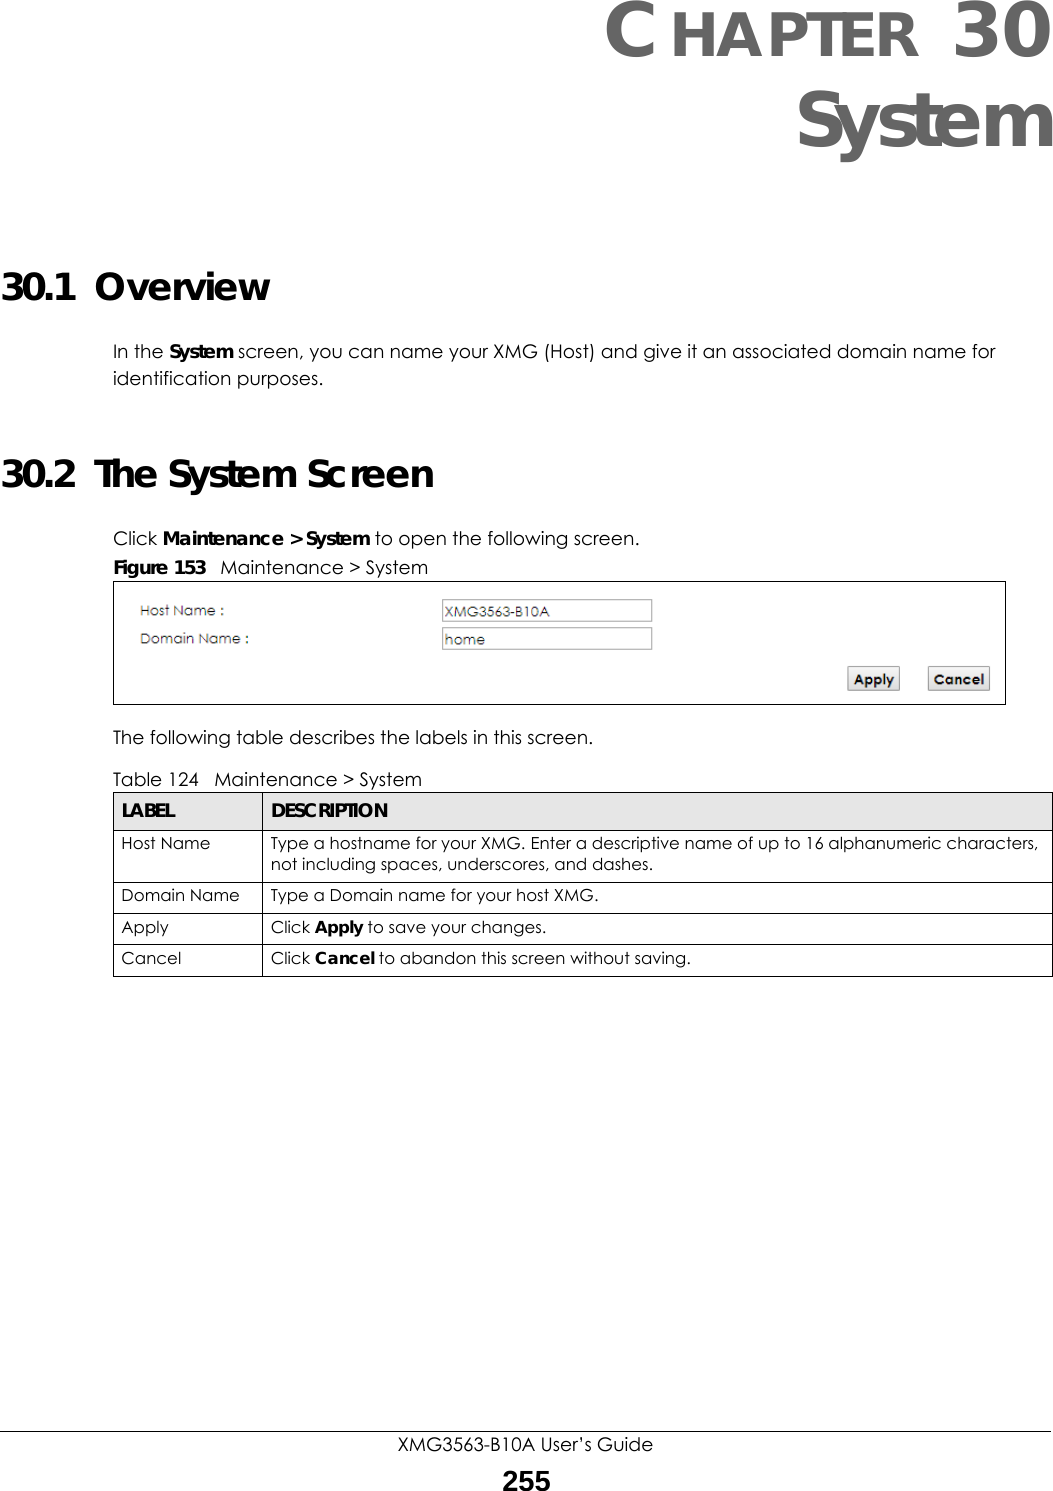 XMG3563-B10A User’s Guide255CHAPTER 30System30.1  OverviewIn the System screen, you can name your XMG (Host) and give it an associated domain name for identification purposes. 30.2  The System ScreenClick Maintenance &gt; System to open the following screen.Figure 153   Maintenance &gt; SystemThe following table describes the labels in this screen. Table 124   Maintenance &gt; SystemLABEL DESCRIPTIONHost Name Type a hostname for your XMG. Enter a descriptive name of up to 16 alphanumeric characters, not including spaces, underscores, and dashes.Domain Name Type a Domain name for your host XMG.Apply Click Apply to save your changes.Cancel Click Cancel to abandon this screen without saving.